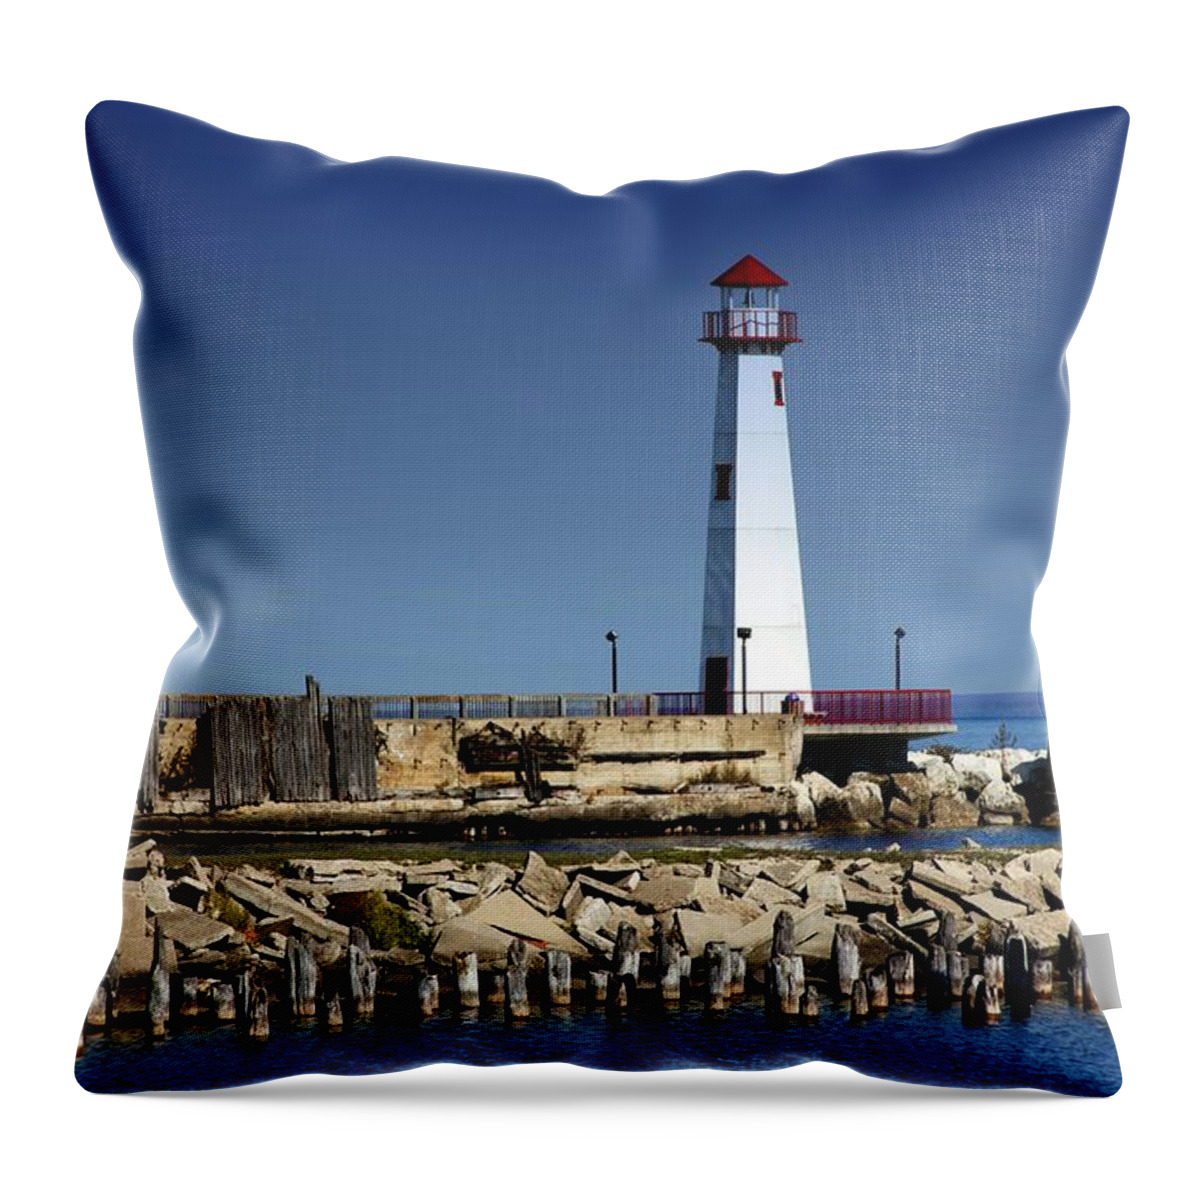 Saint Ignace Michigan Throw Pillow featuring the photograph St. Ignace Lighthouse by Pat Cook